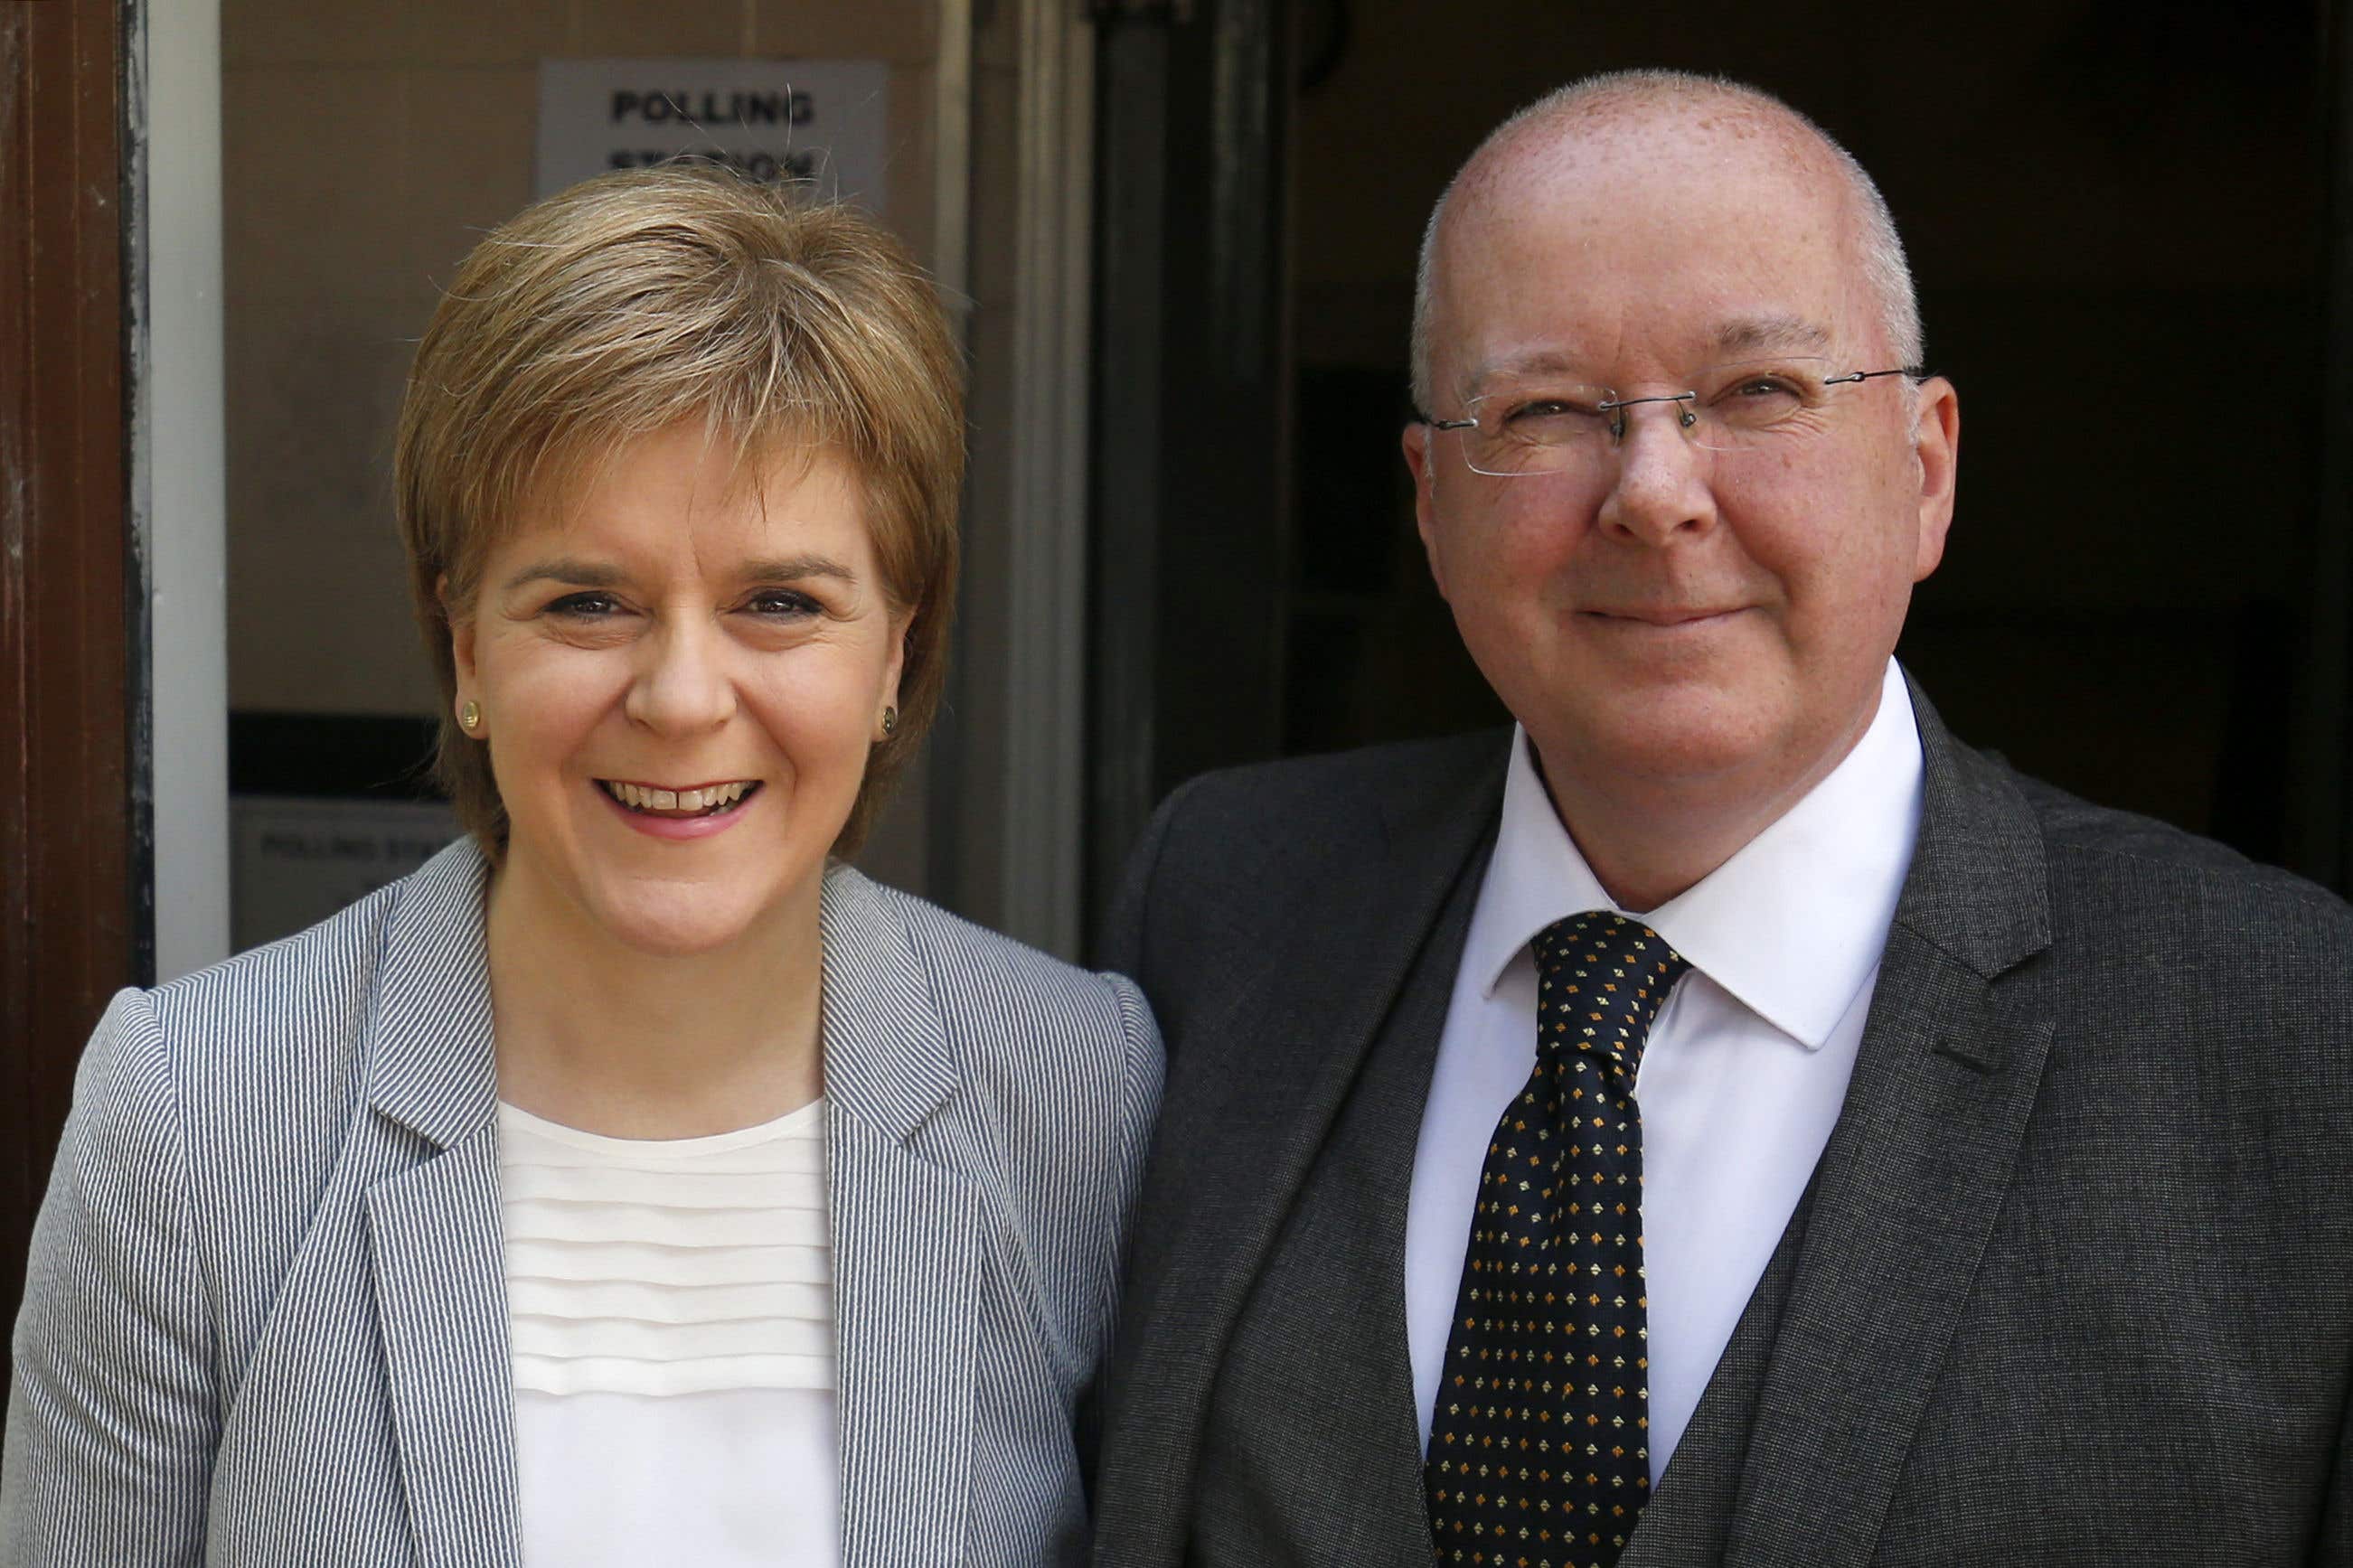 Peter Murrell, pictured with his wife Nicola Sturgeon, has been charged in an investigation into the SNP’s finances